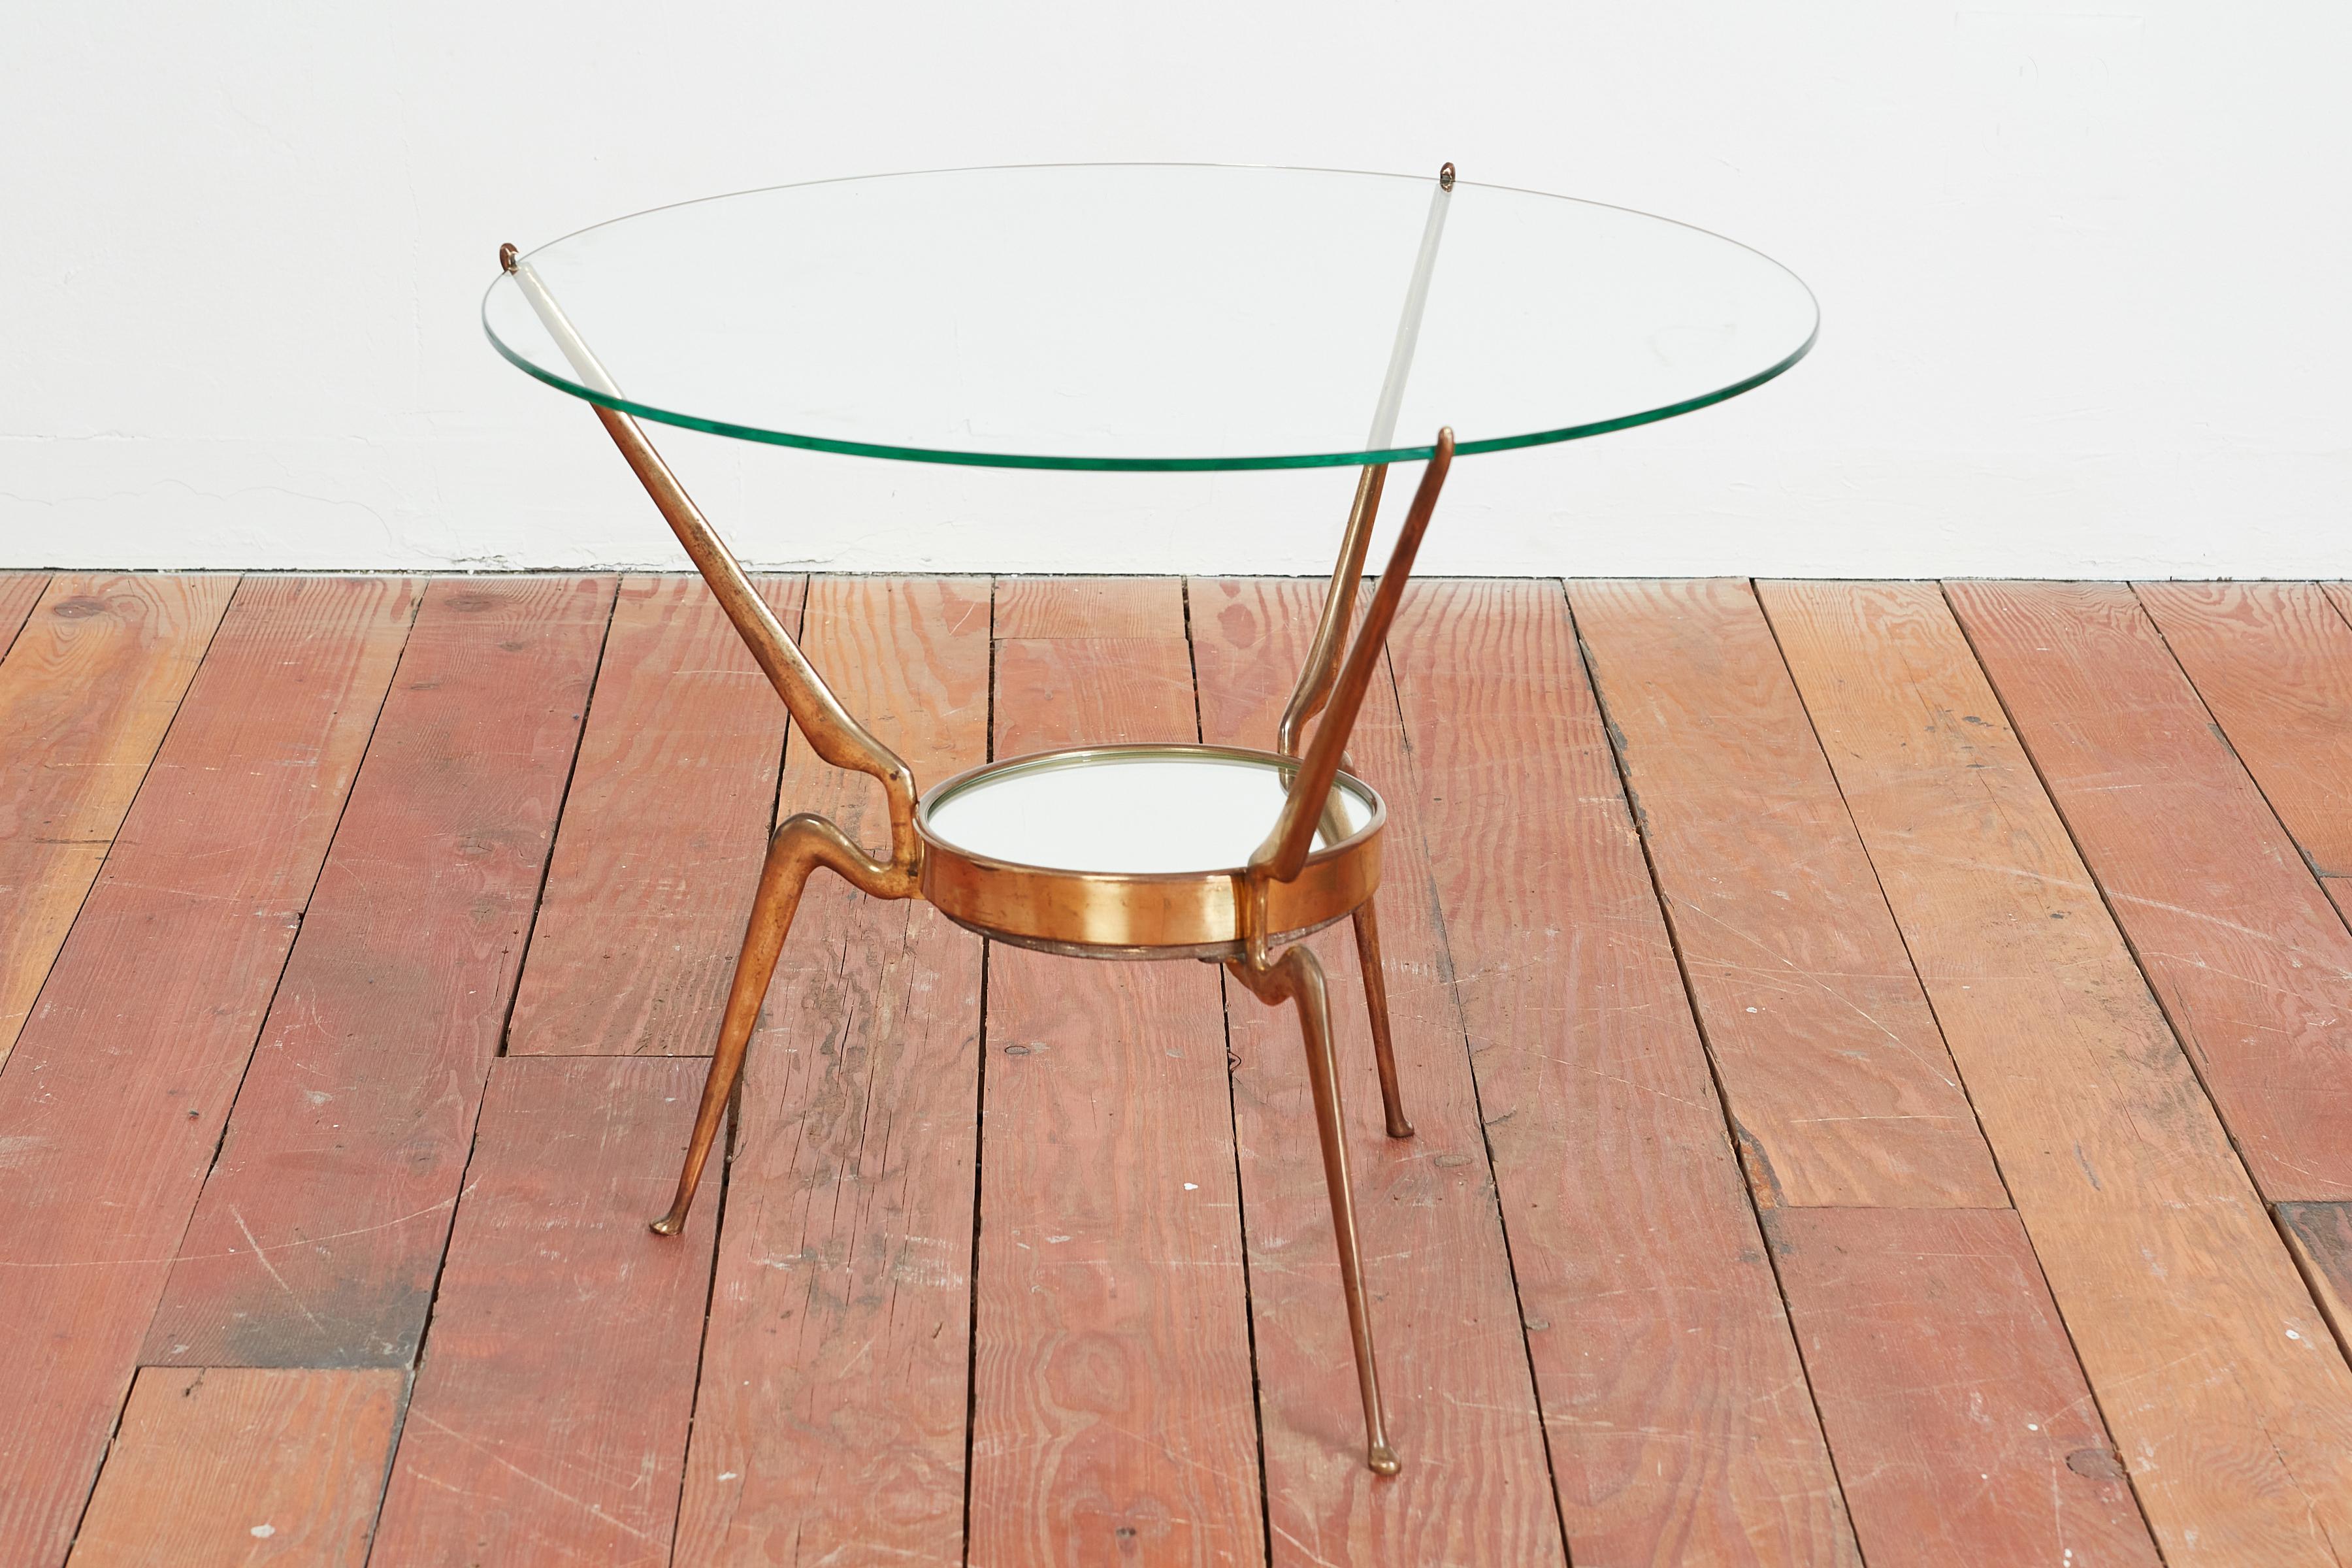 Incredible sculptural side table by Cesare Lacca 
Italy 1950's 
Solid brass tripod legs that are angled with a curve 
Delicately holds original glass top and round mirrored center piece within base. 
Wonderful design 